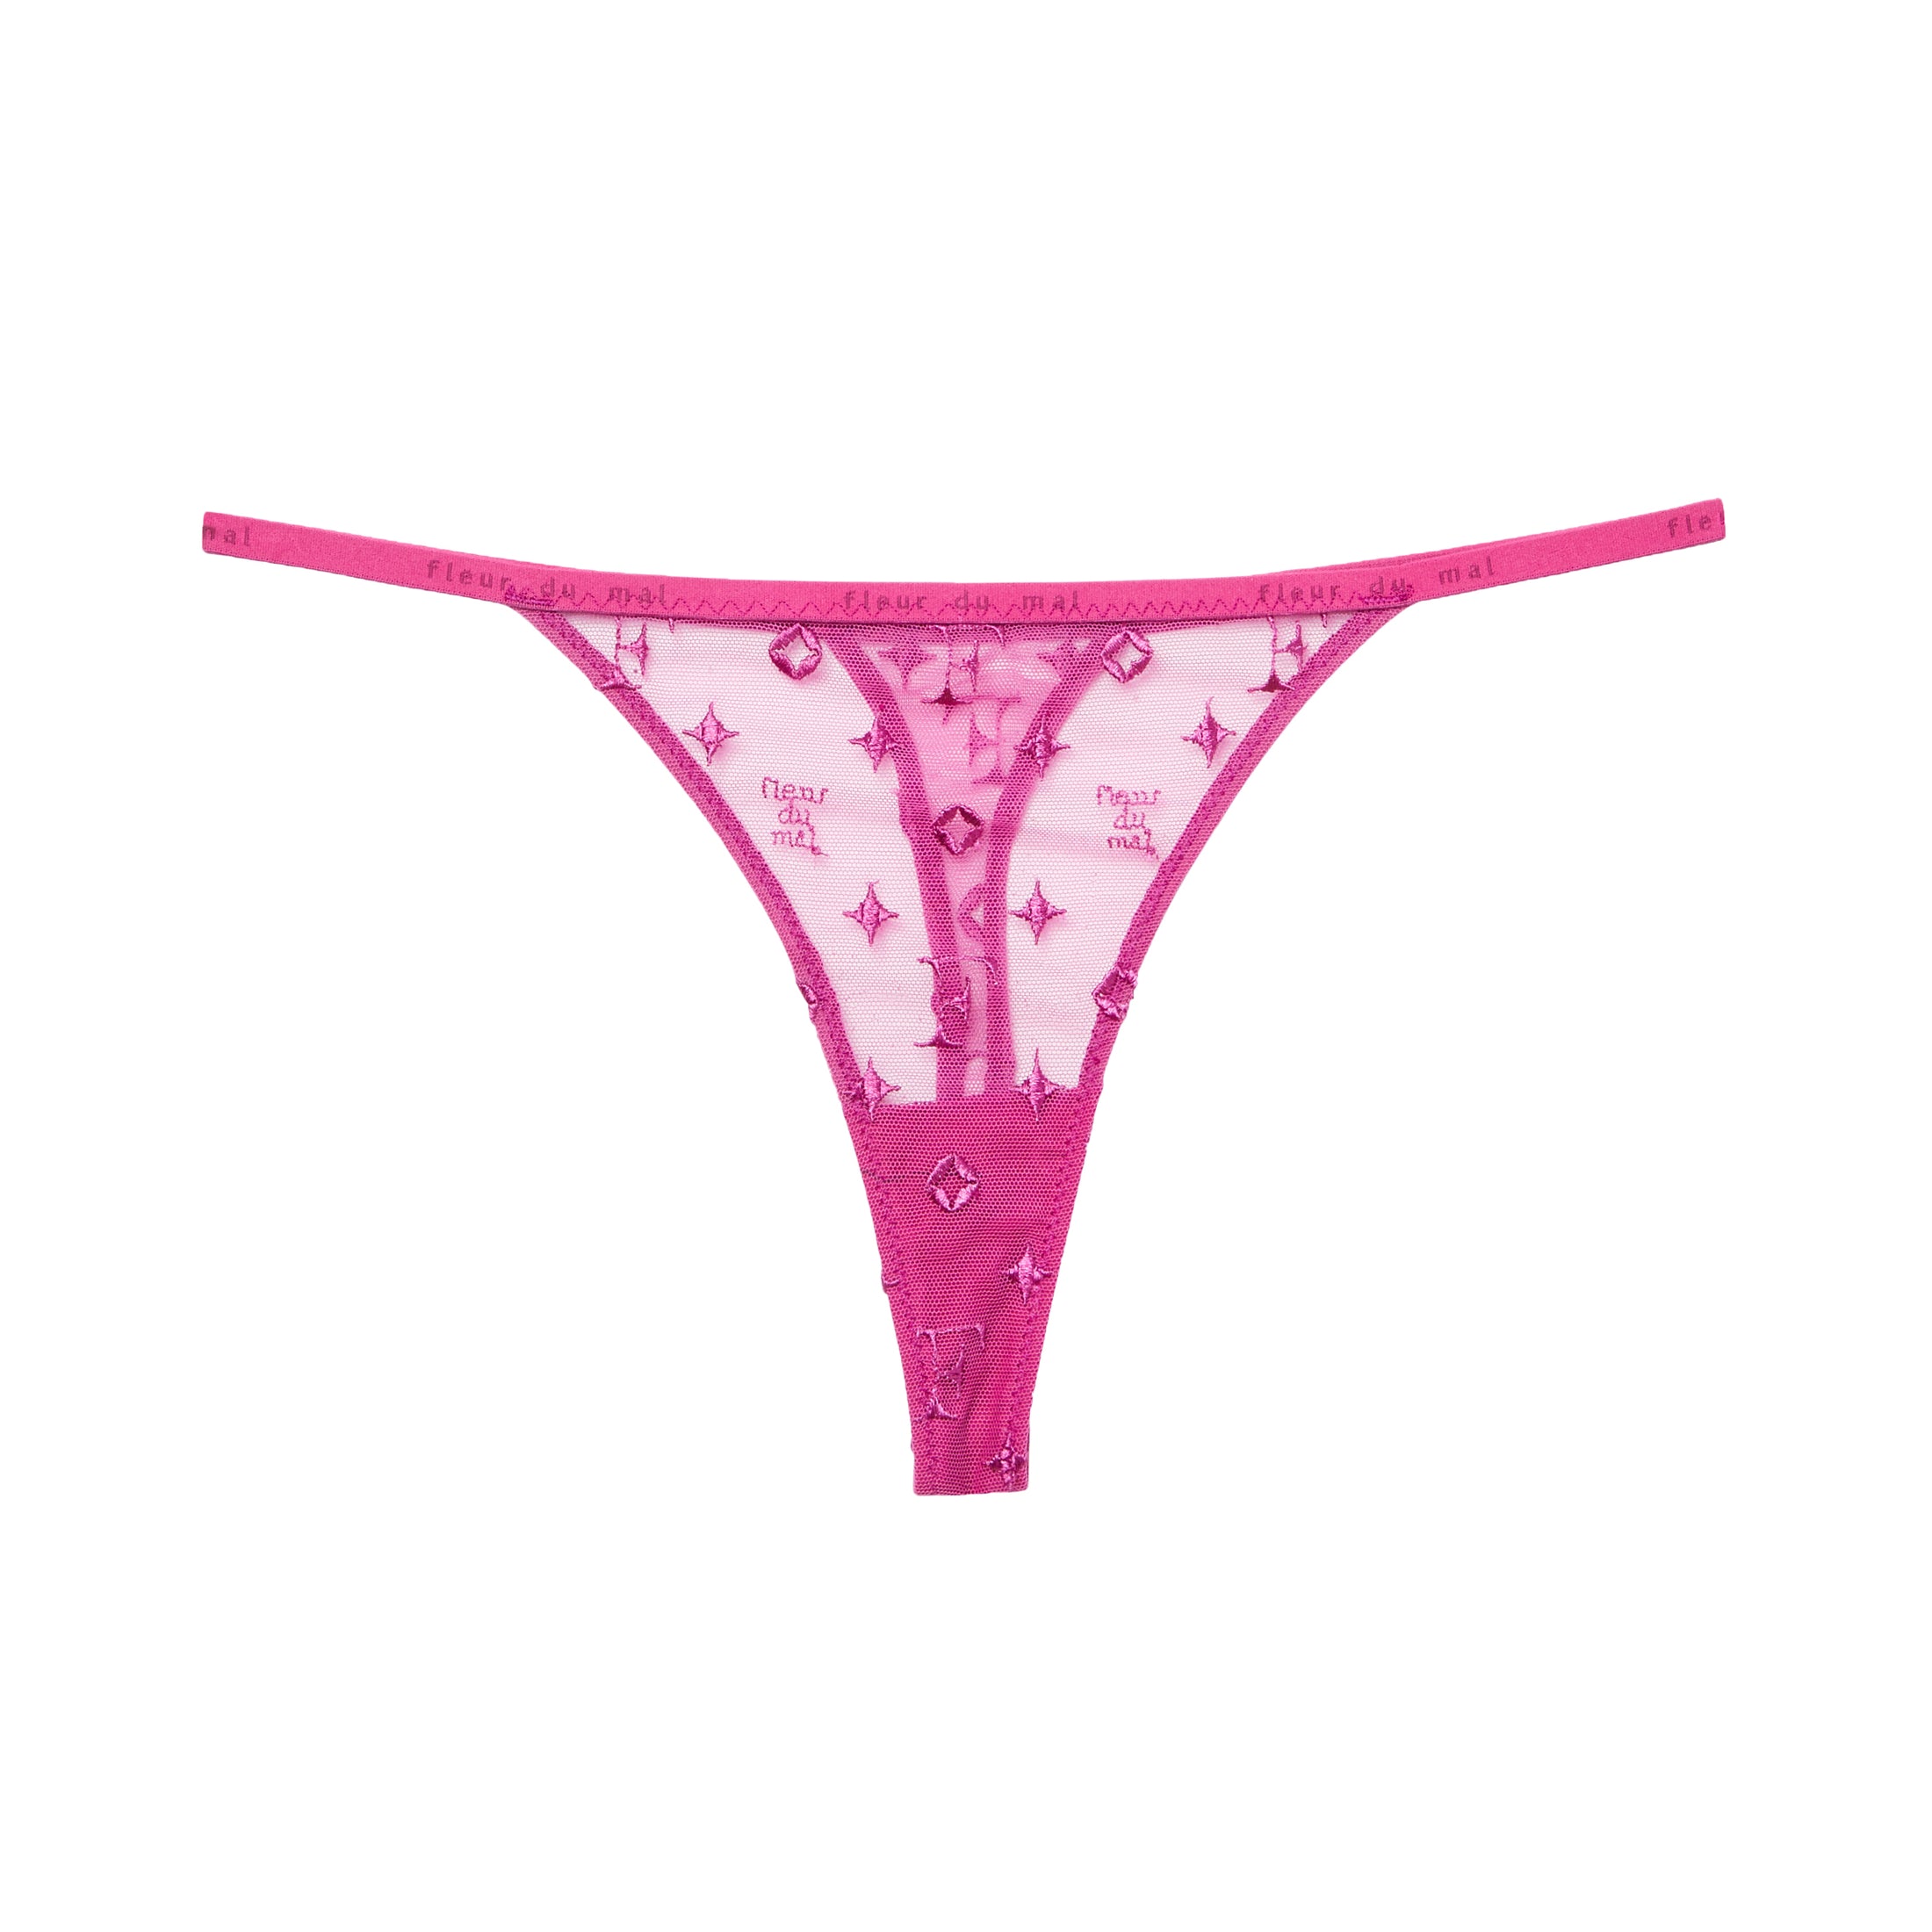 Monogram Embroidery Thong